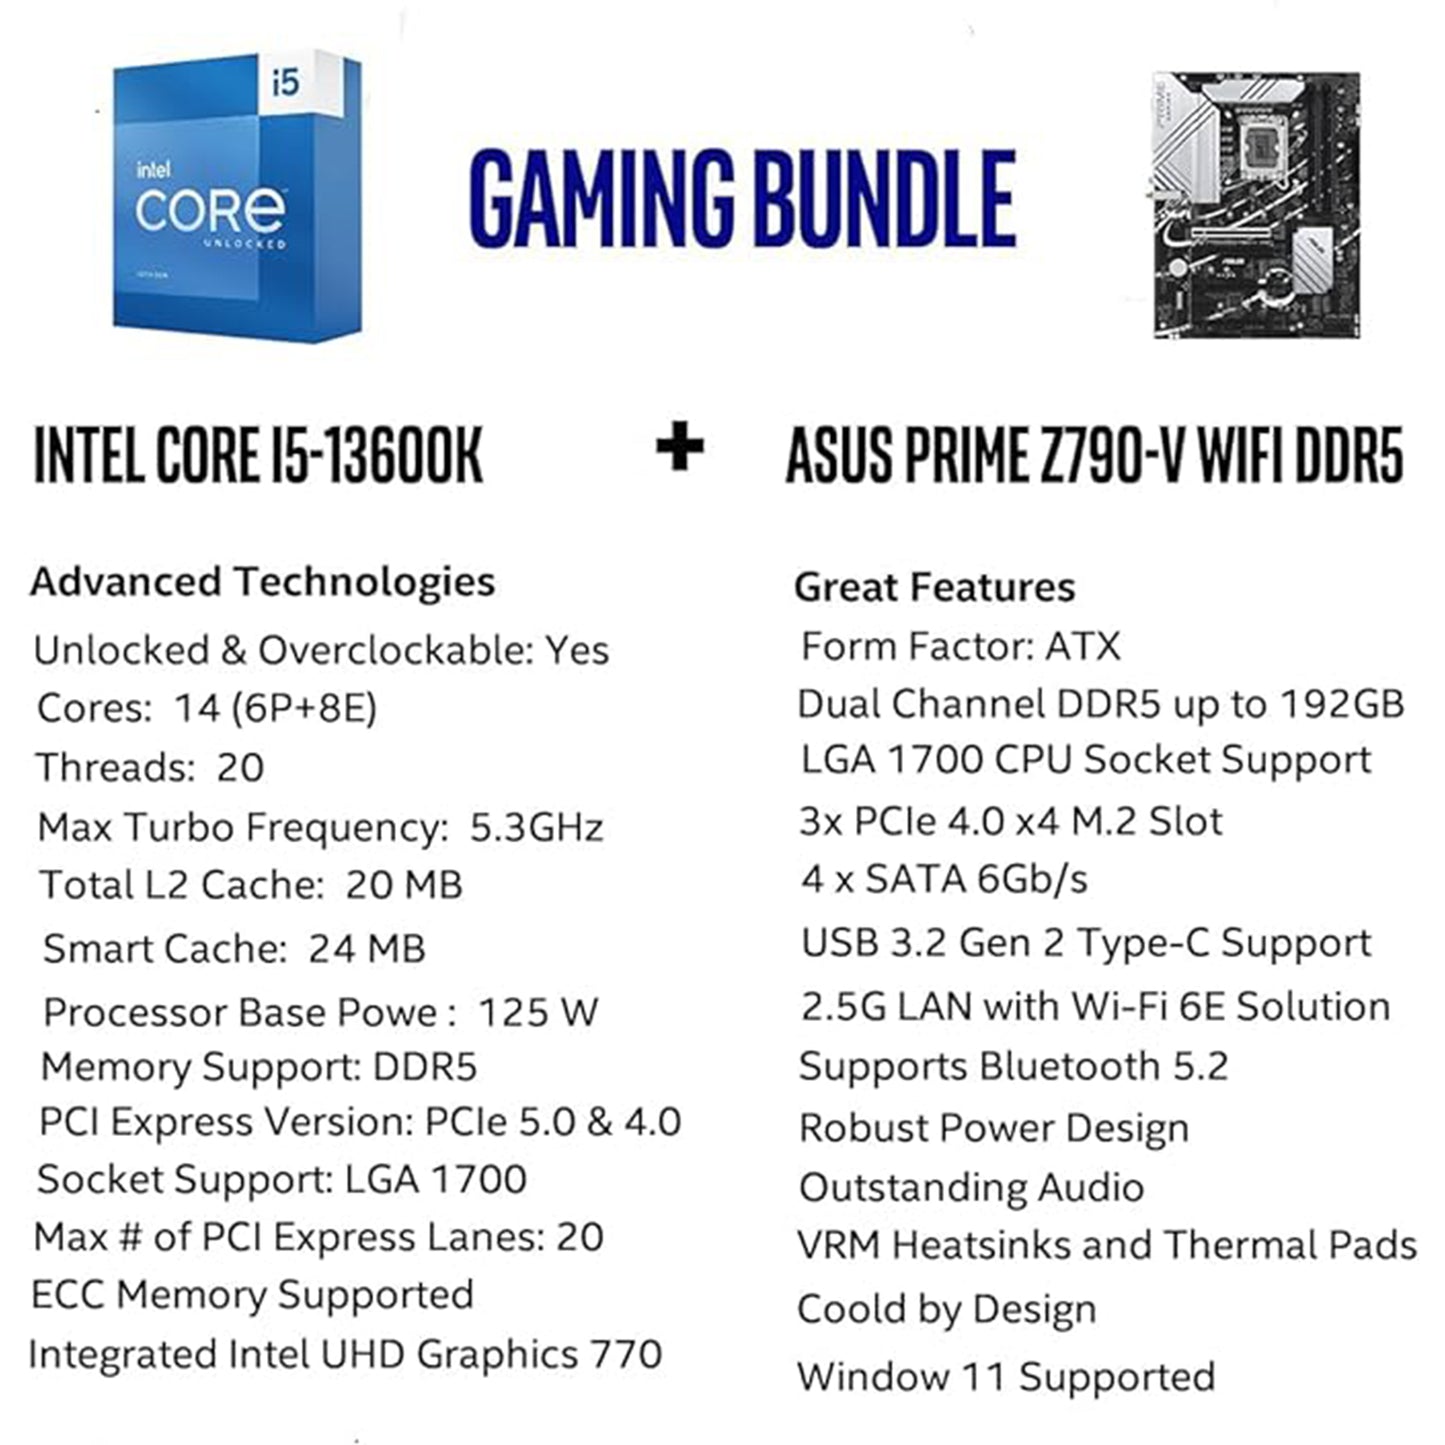 Micro Center Intel Core i5-13600K 14 (6P+8E) Cores up to 5.3 GHz Unlocked LGA 1700 Desktop Processor with Integrated Intel UHD Graphics 770 Bundle with ASUS Prime Z790-V WiFi DDR5 ATX Motherboard